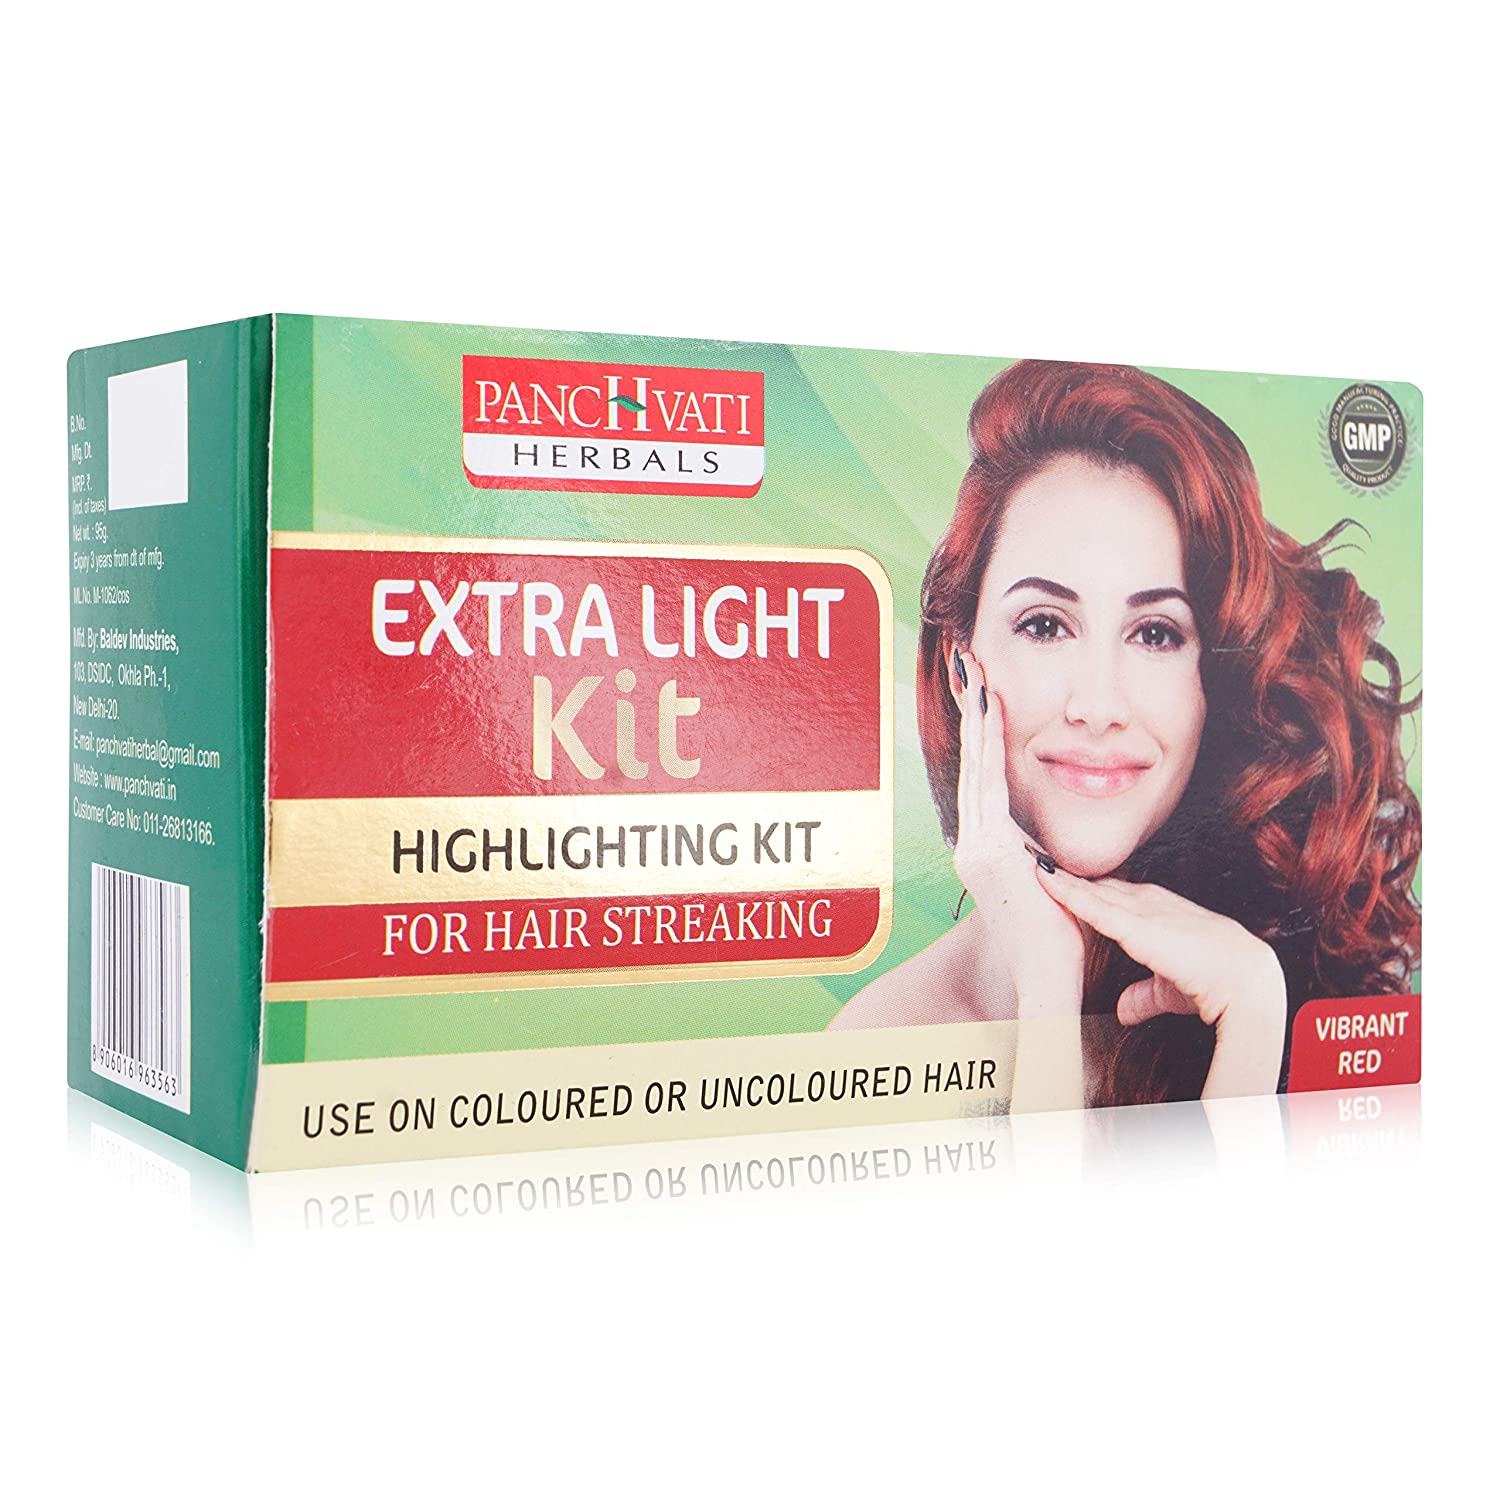 Panchvati Herbals Extra Light for Hair Kit, 95g Red Color, Pack of- 2